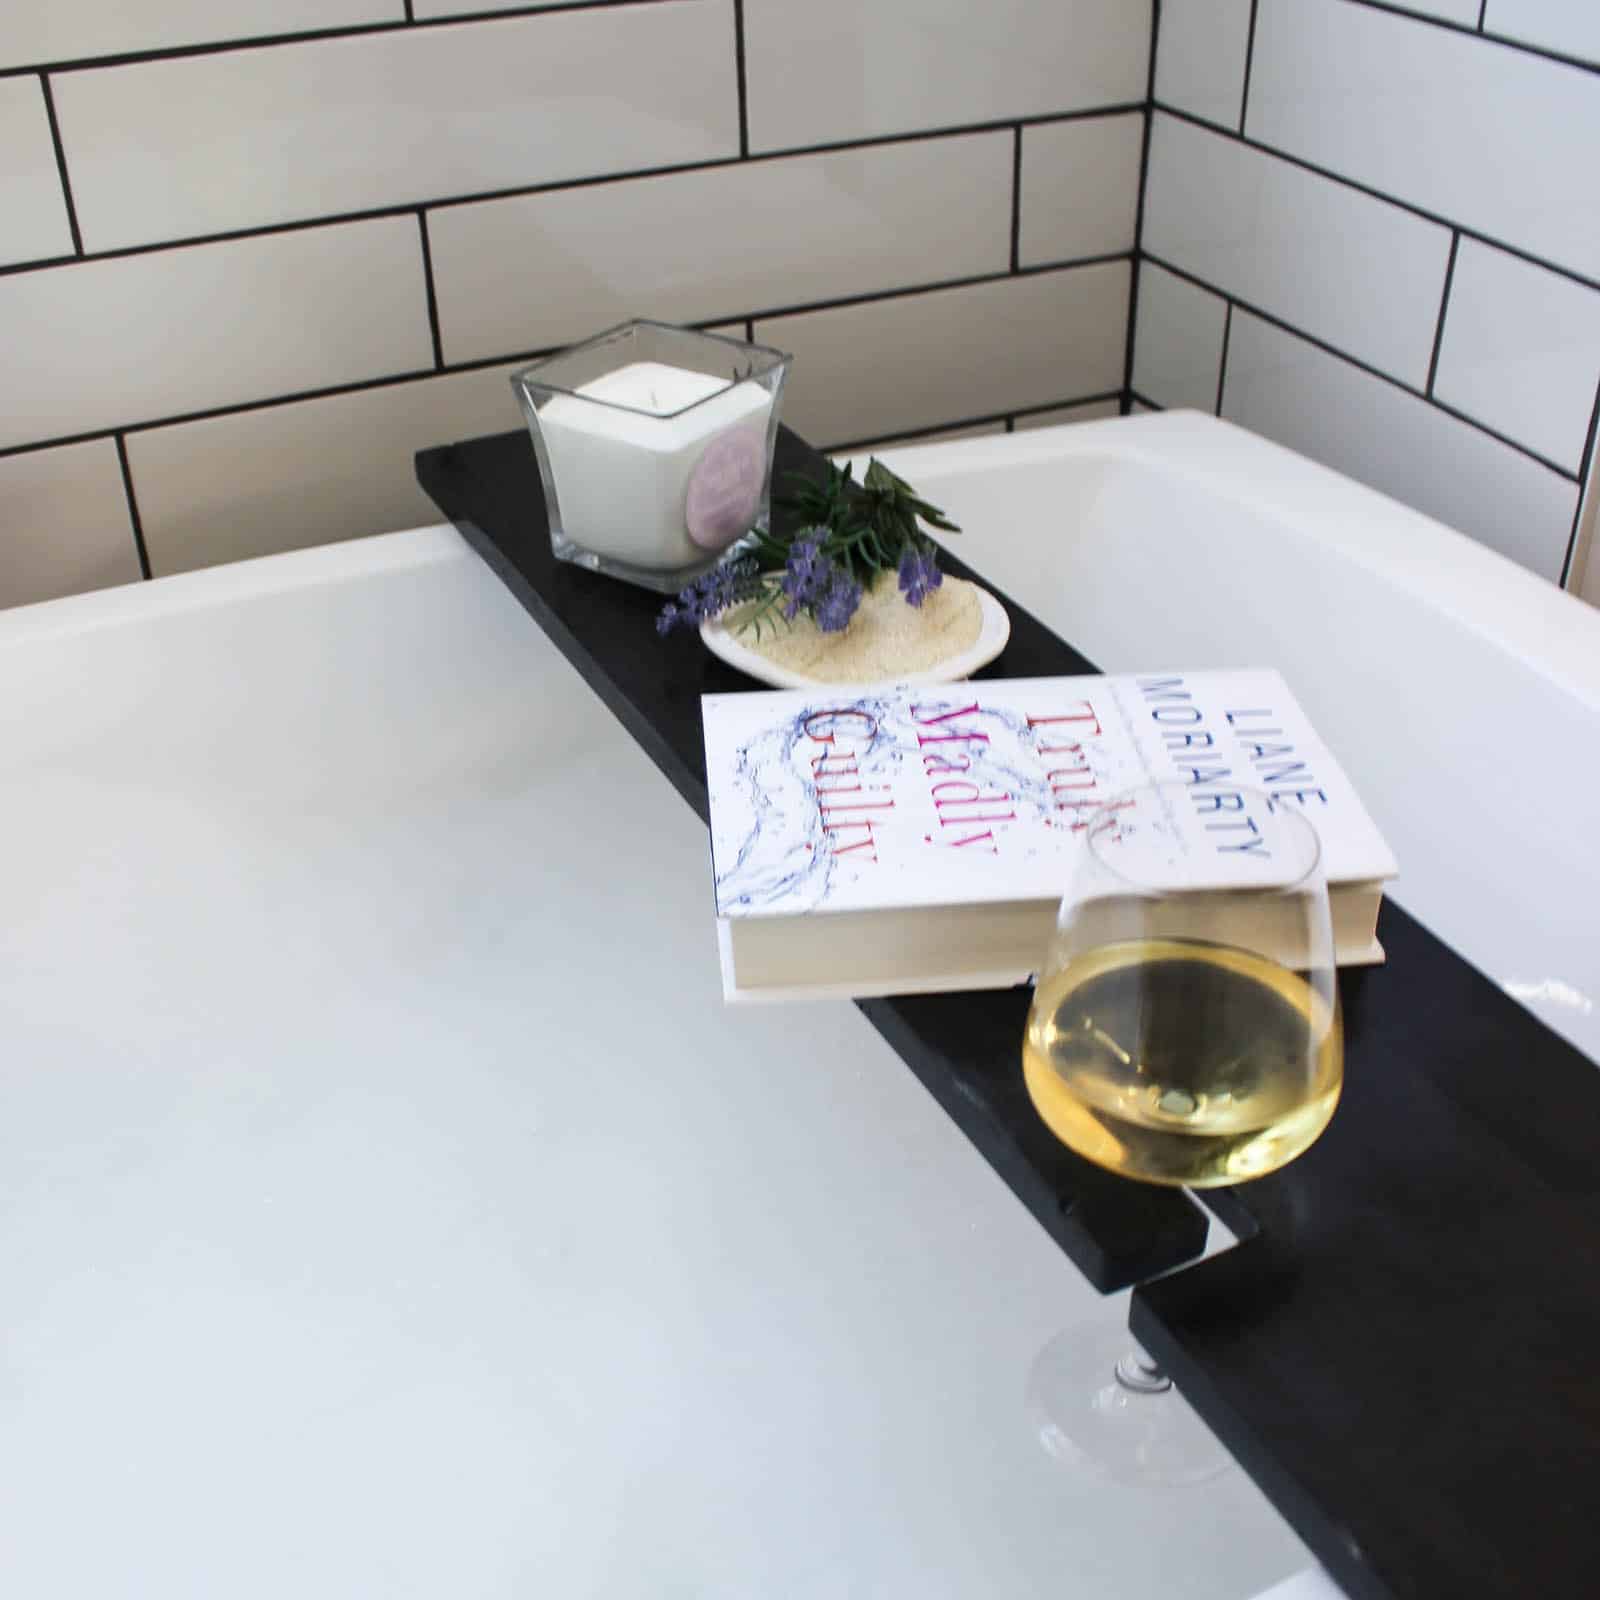 Build your own DIY Bath Table with this simple tutorial! Bath trays are the perfect bathroom accessories to add character and style! Love that this bathtub tray has a wine glass holder too!